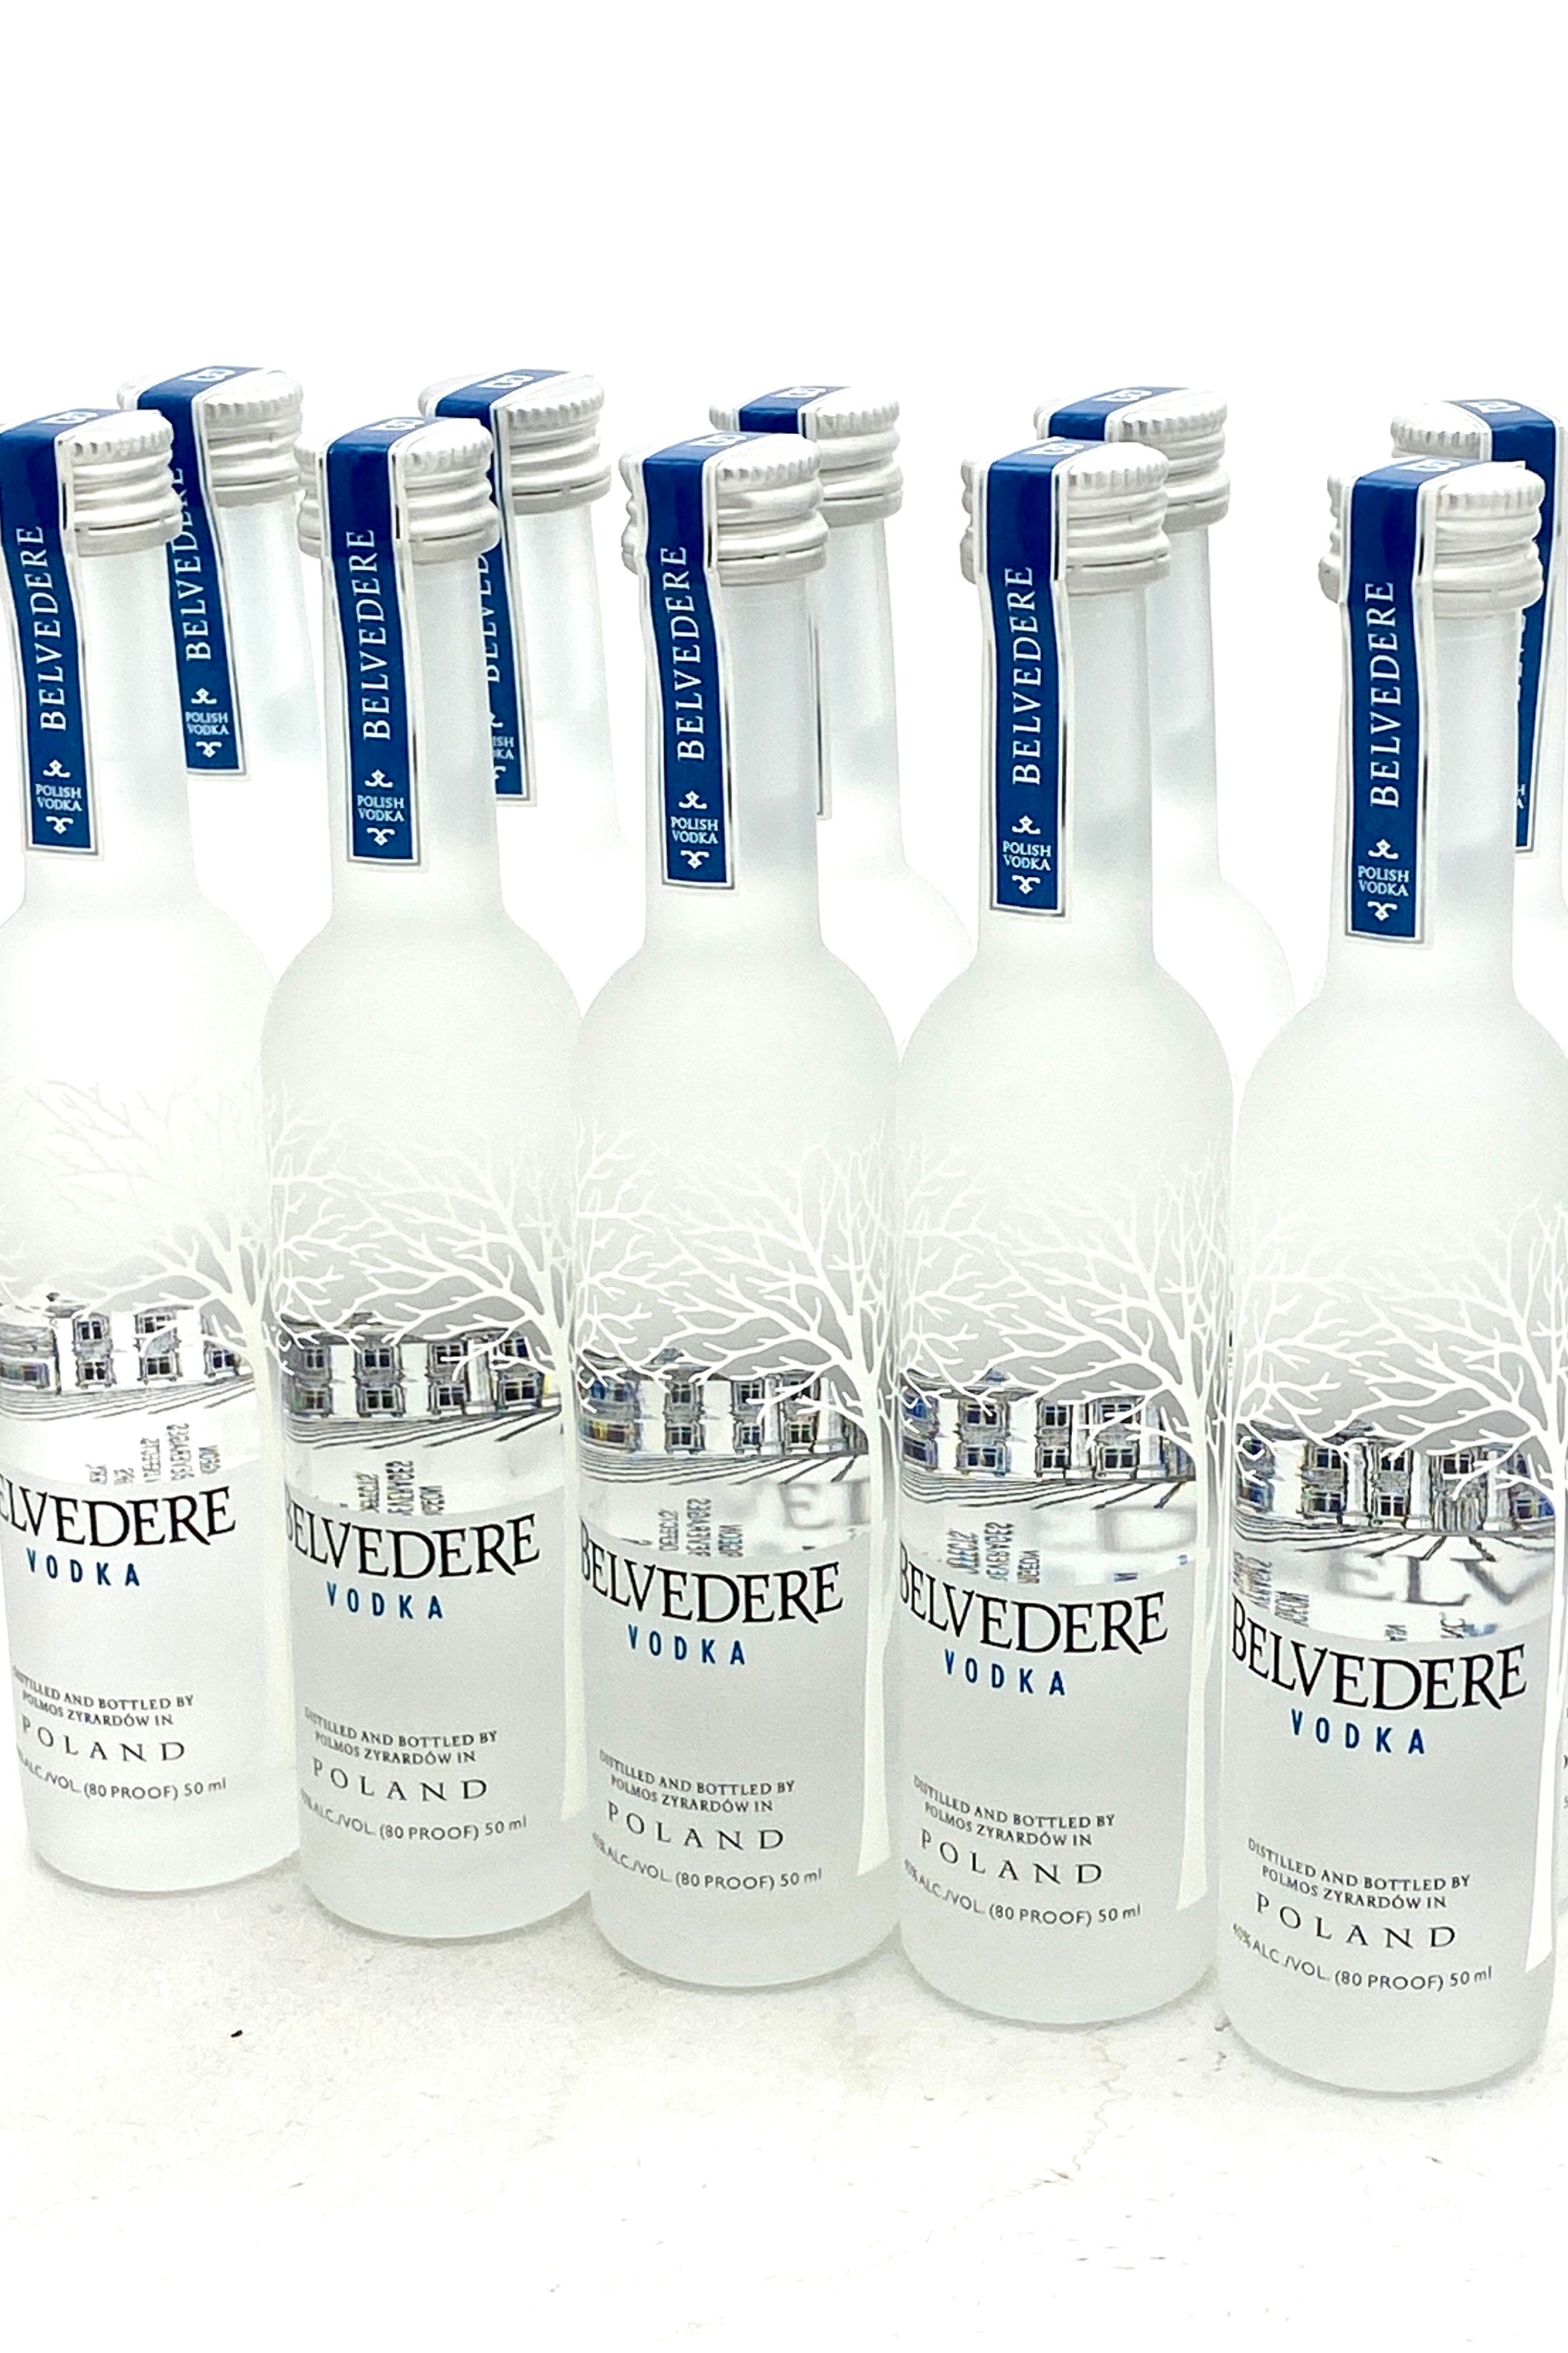 Our top pick: Belvedere